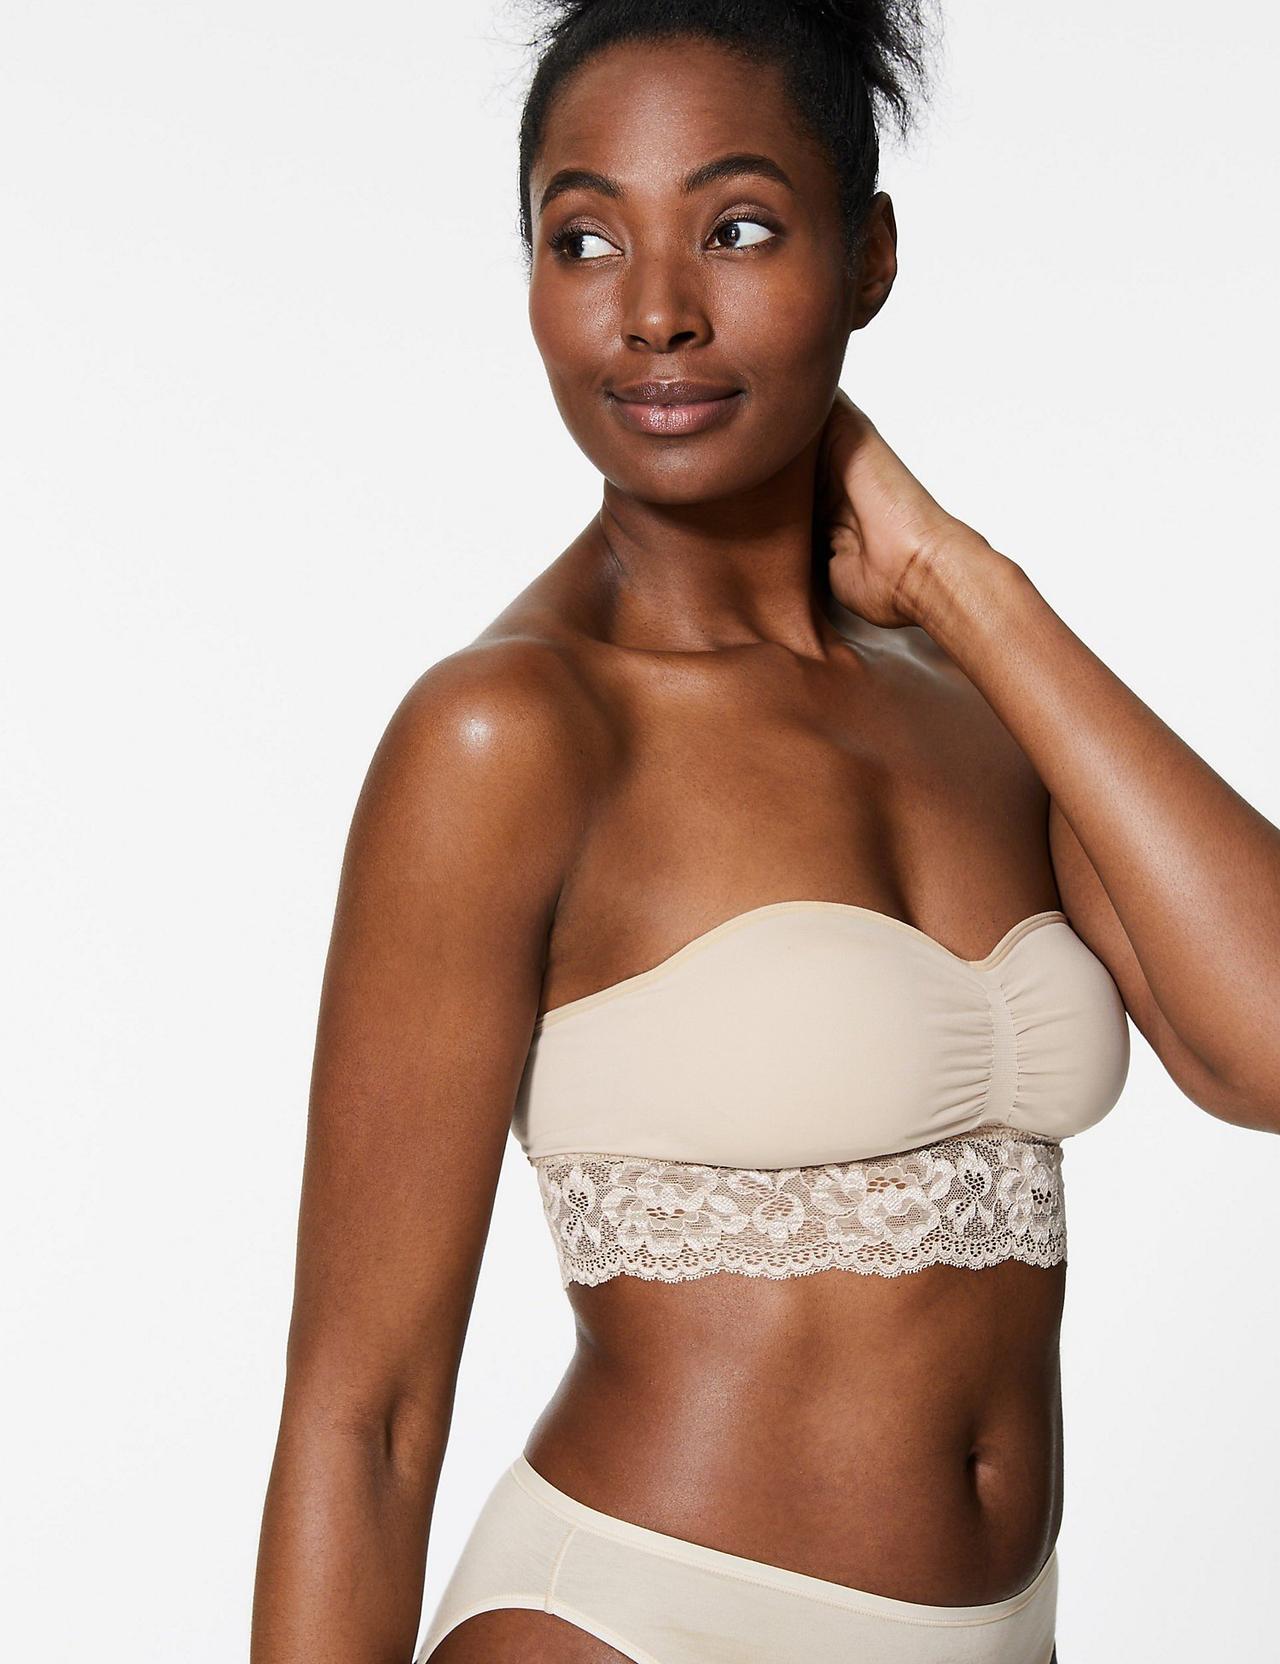 The 11 Best Supportive Strapless Bras  Lace bandeau bra, Full figure strapless  bra, Strapless bra